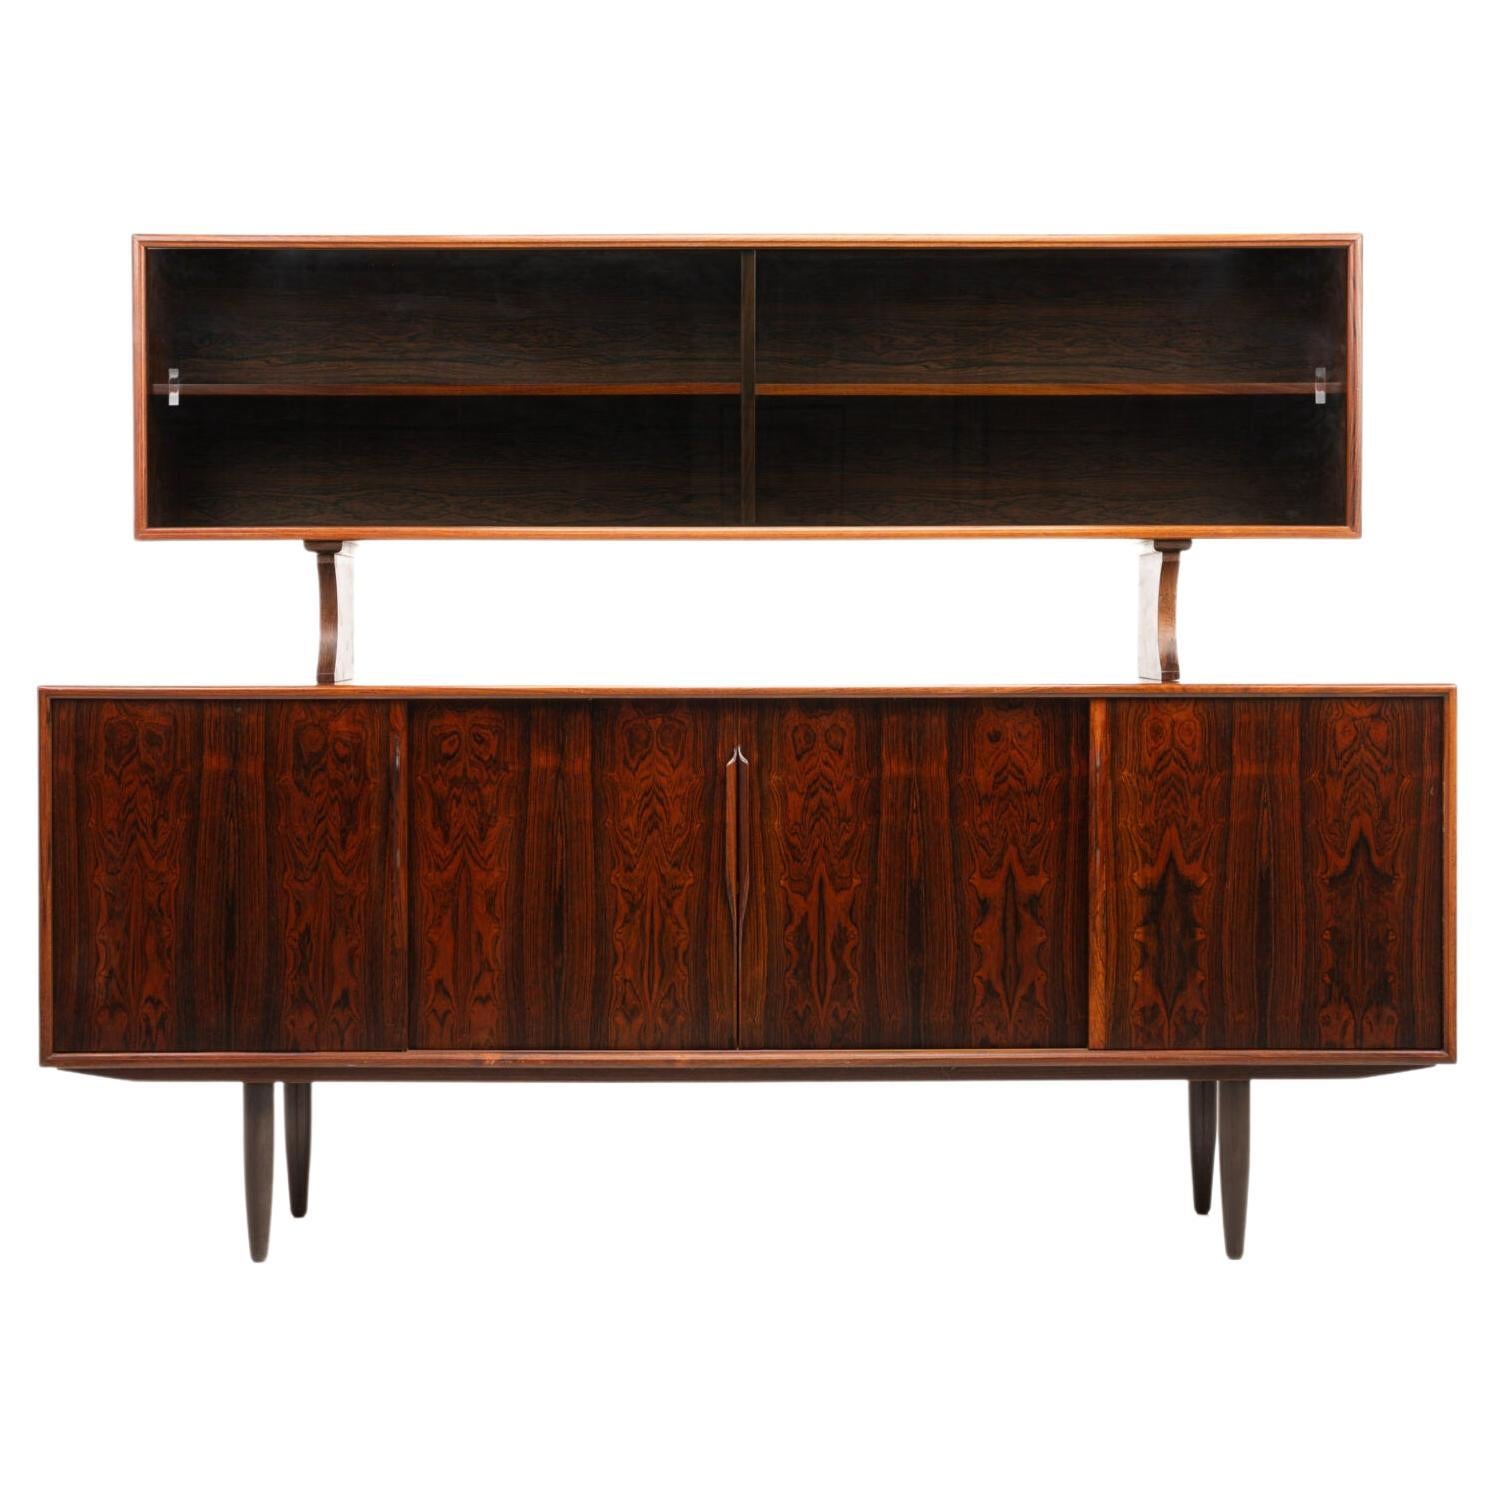 Rare Rosewood Buffet Sideboard by Axel Christensen for ACO Møbler, Denmark 1960s